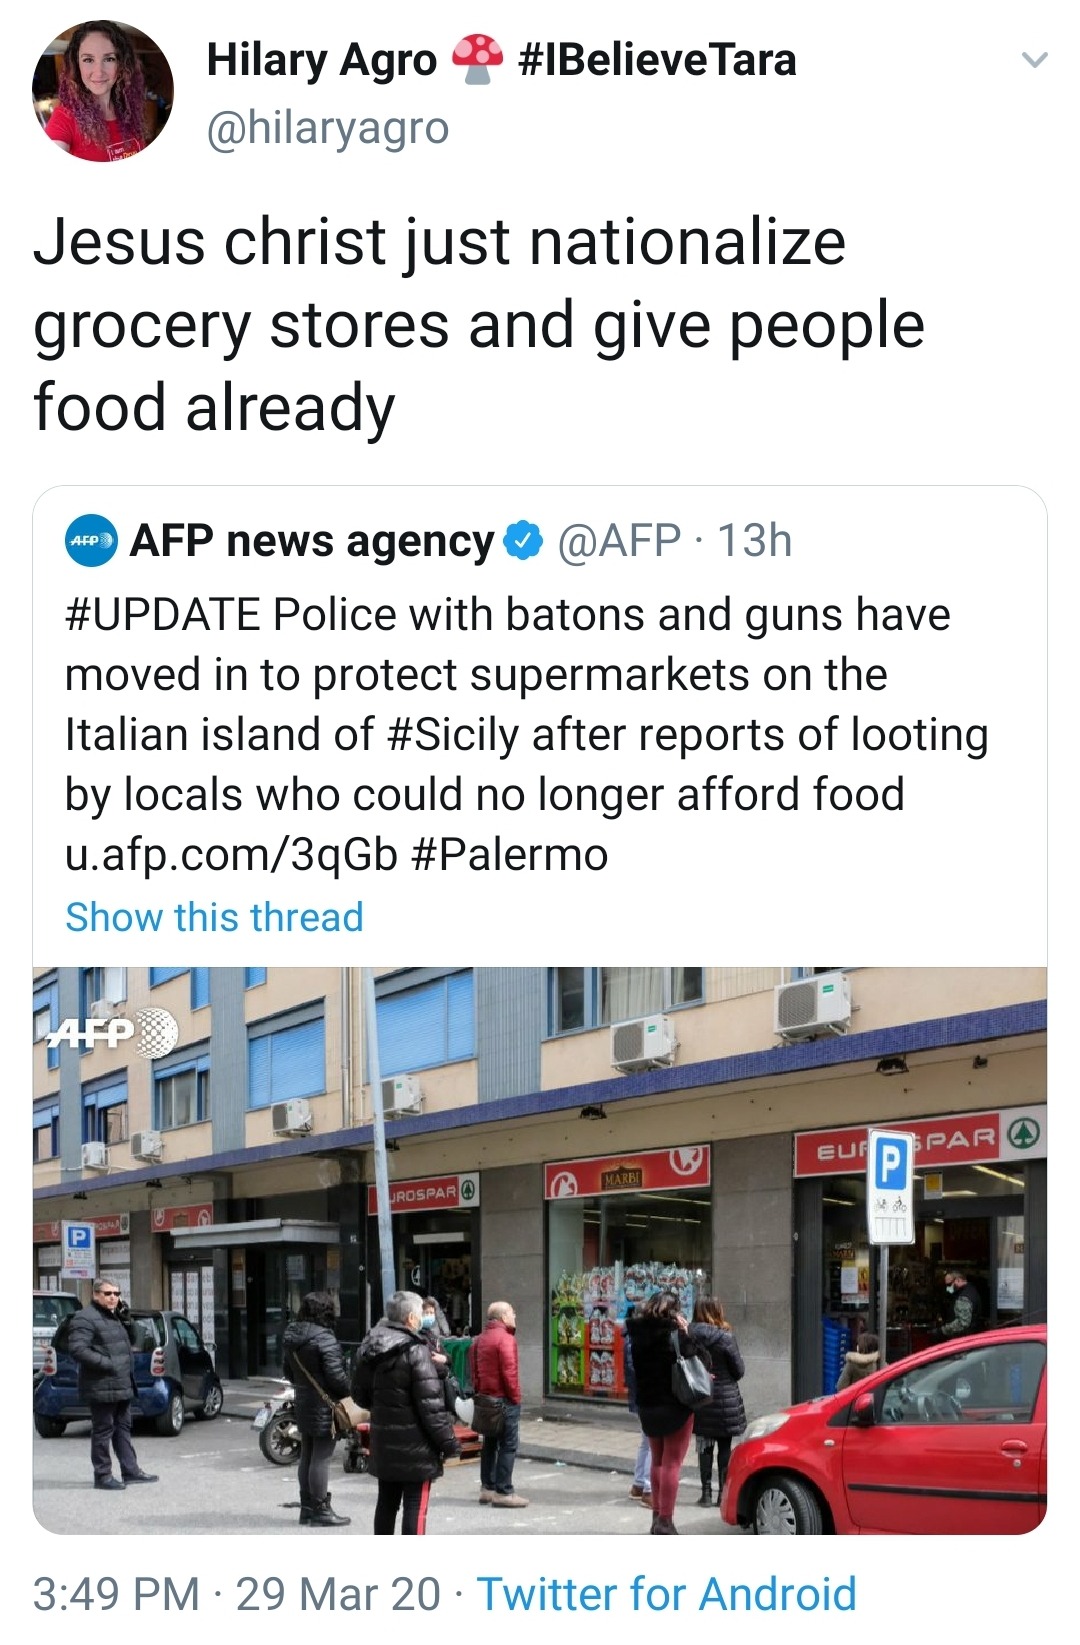 compact car - Hilary Agro B Tara Jesus christ just nationalize grocery stores and give people food already Ago Afp news agency 13h Police with batons and guns have moved in to protect supermarkets on the Italian island of after reports of looting by local